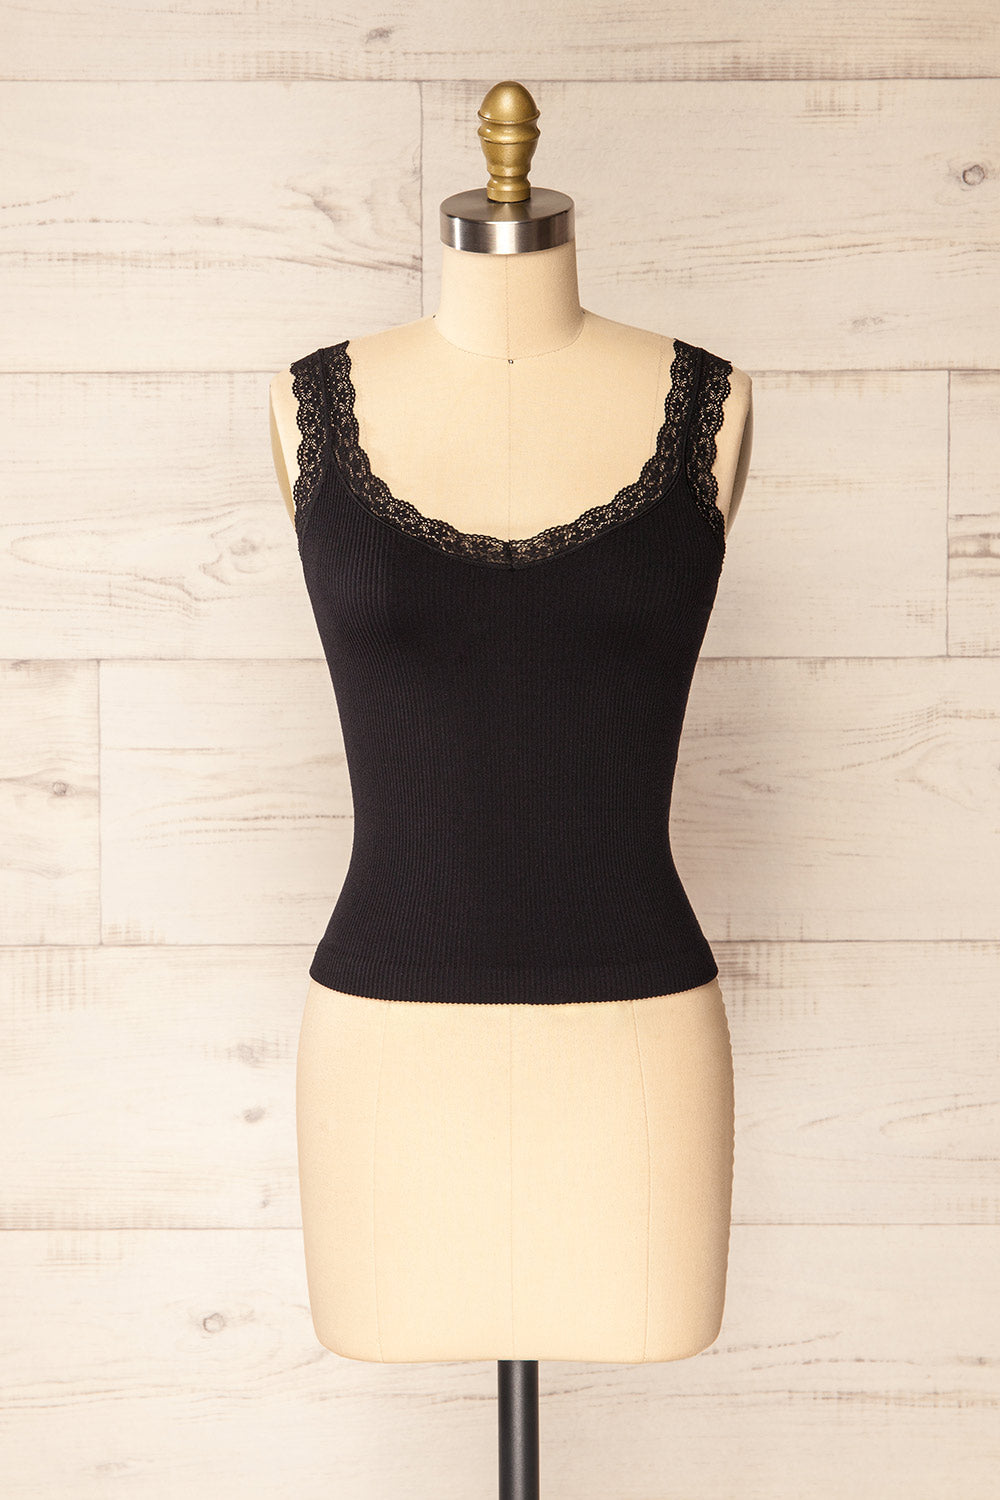 Somensac Black Ribbed Camisole w/ Lace Trim | Boutique 1861 front view